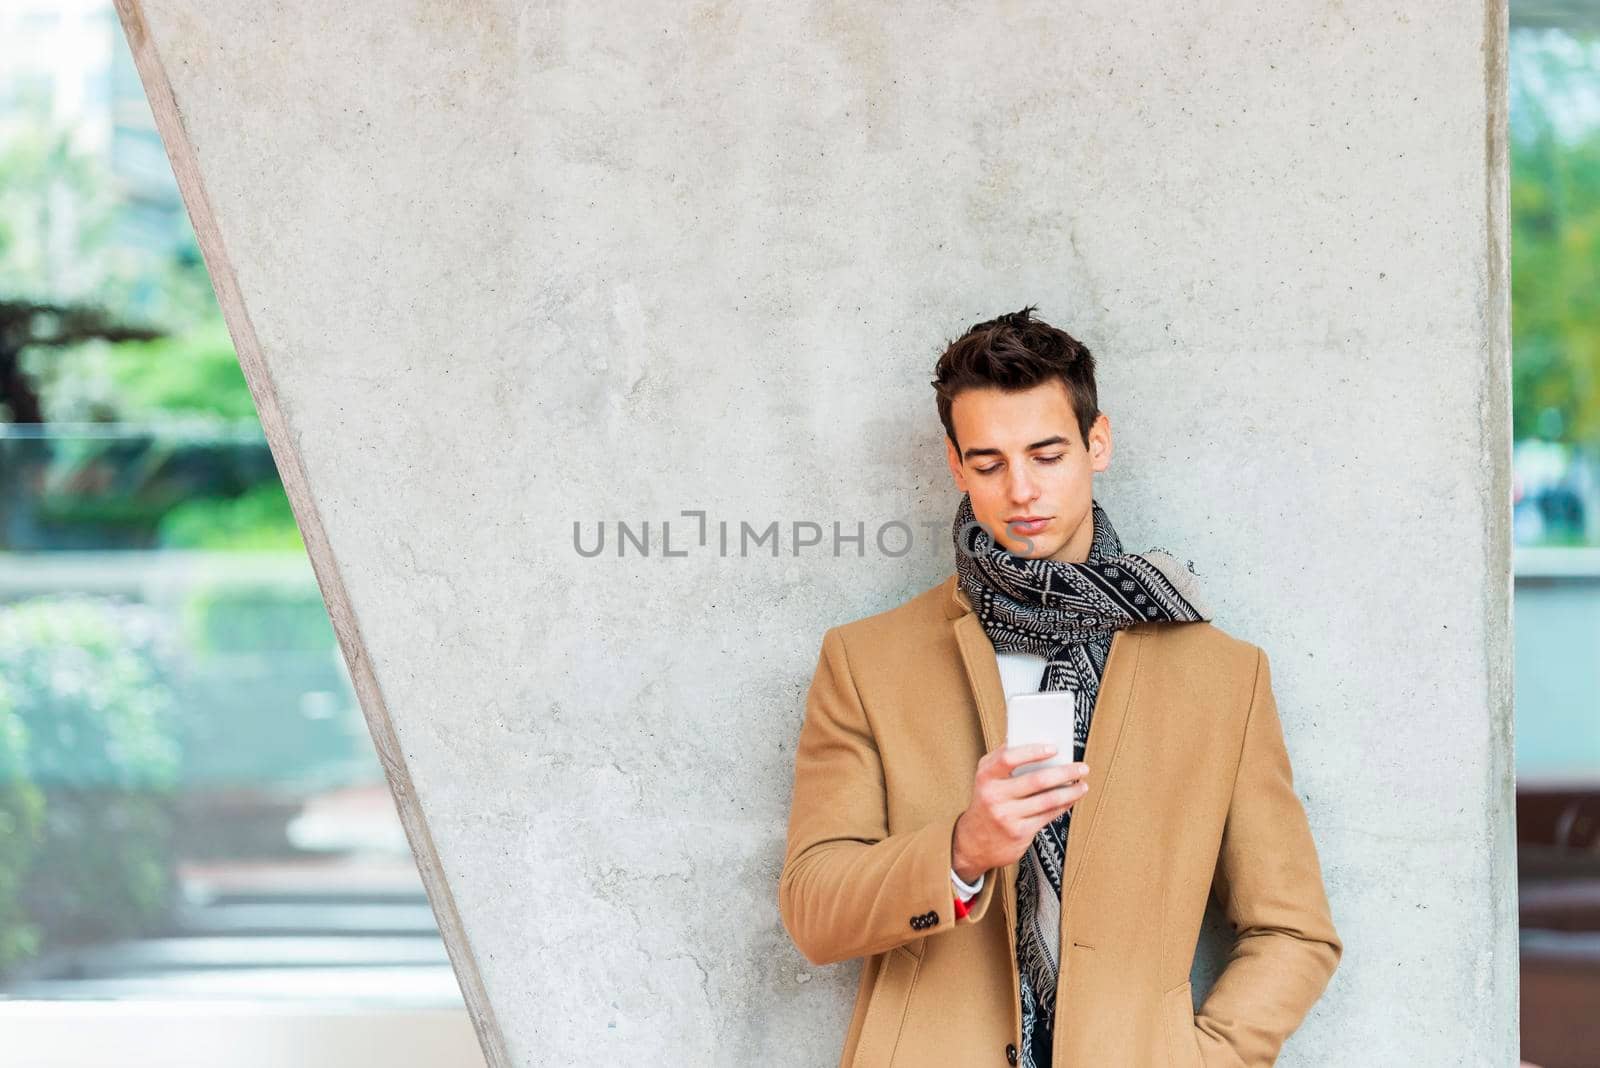 Cheerful man leaning against wall in the city using smartphone